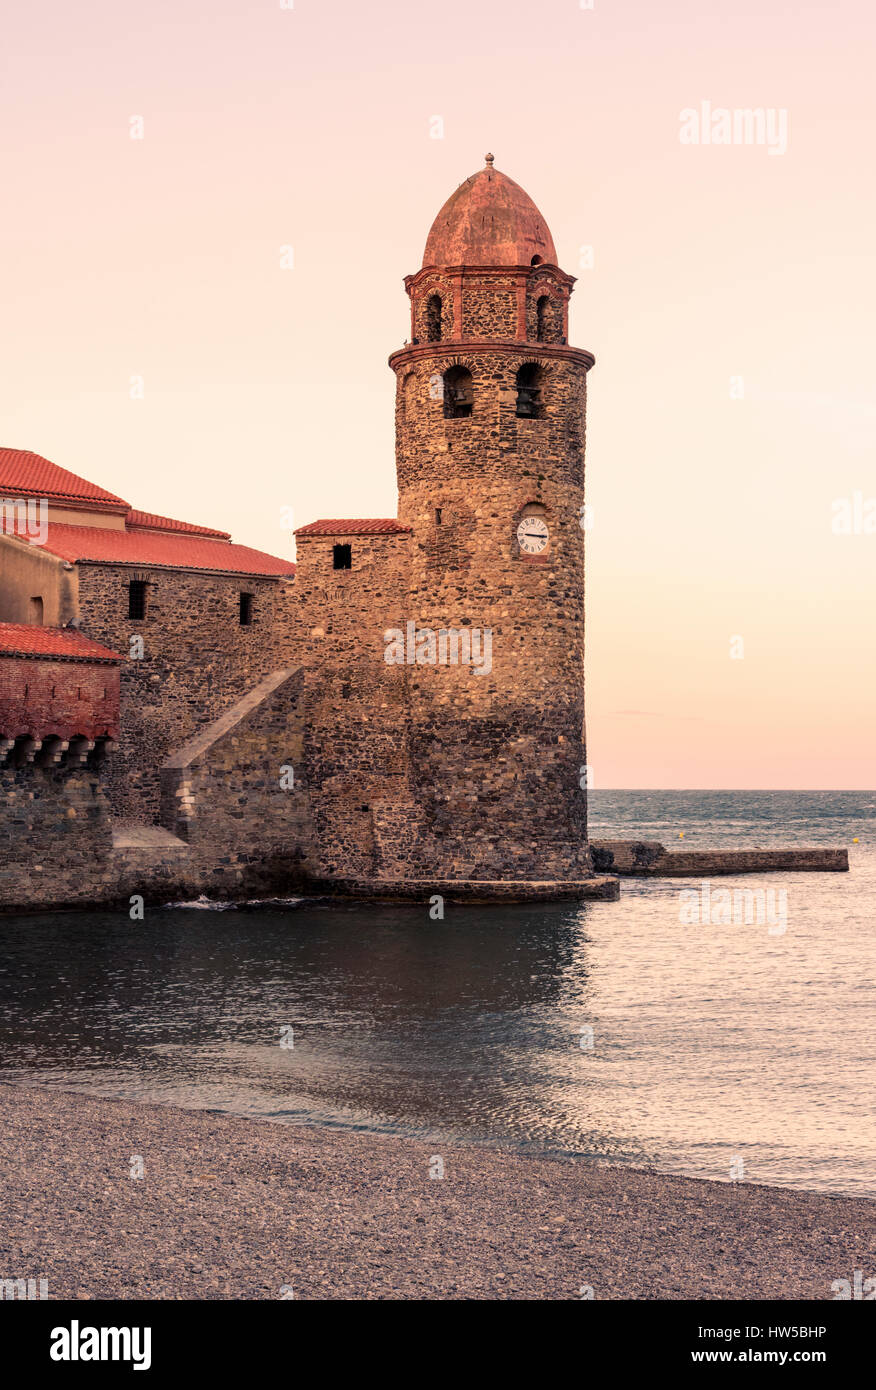 Collioure sunset over the Church of Notre Dame des Anges clocktower, Collioure, Côte Vermeille, France Stock Photo